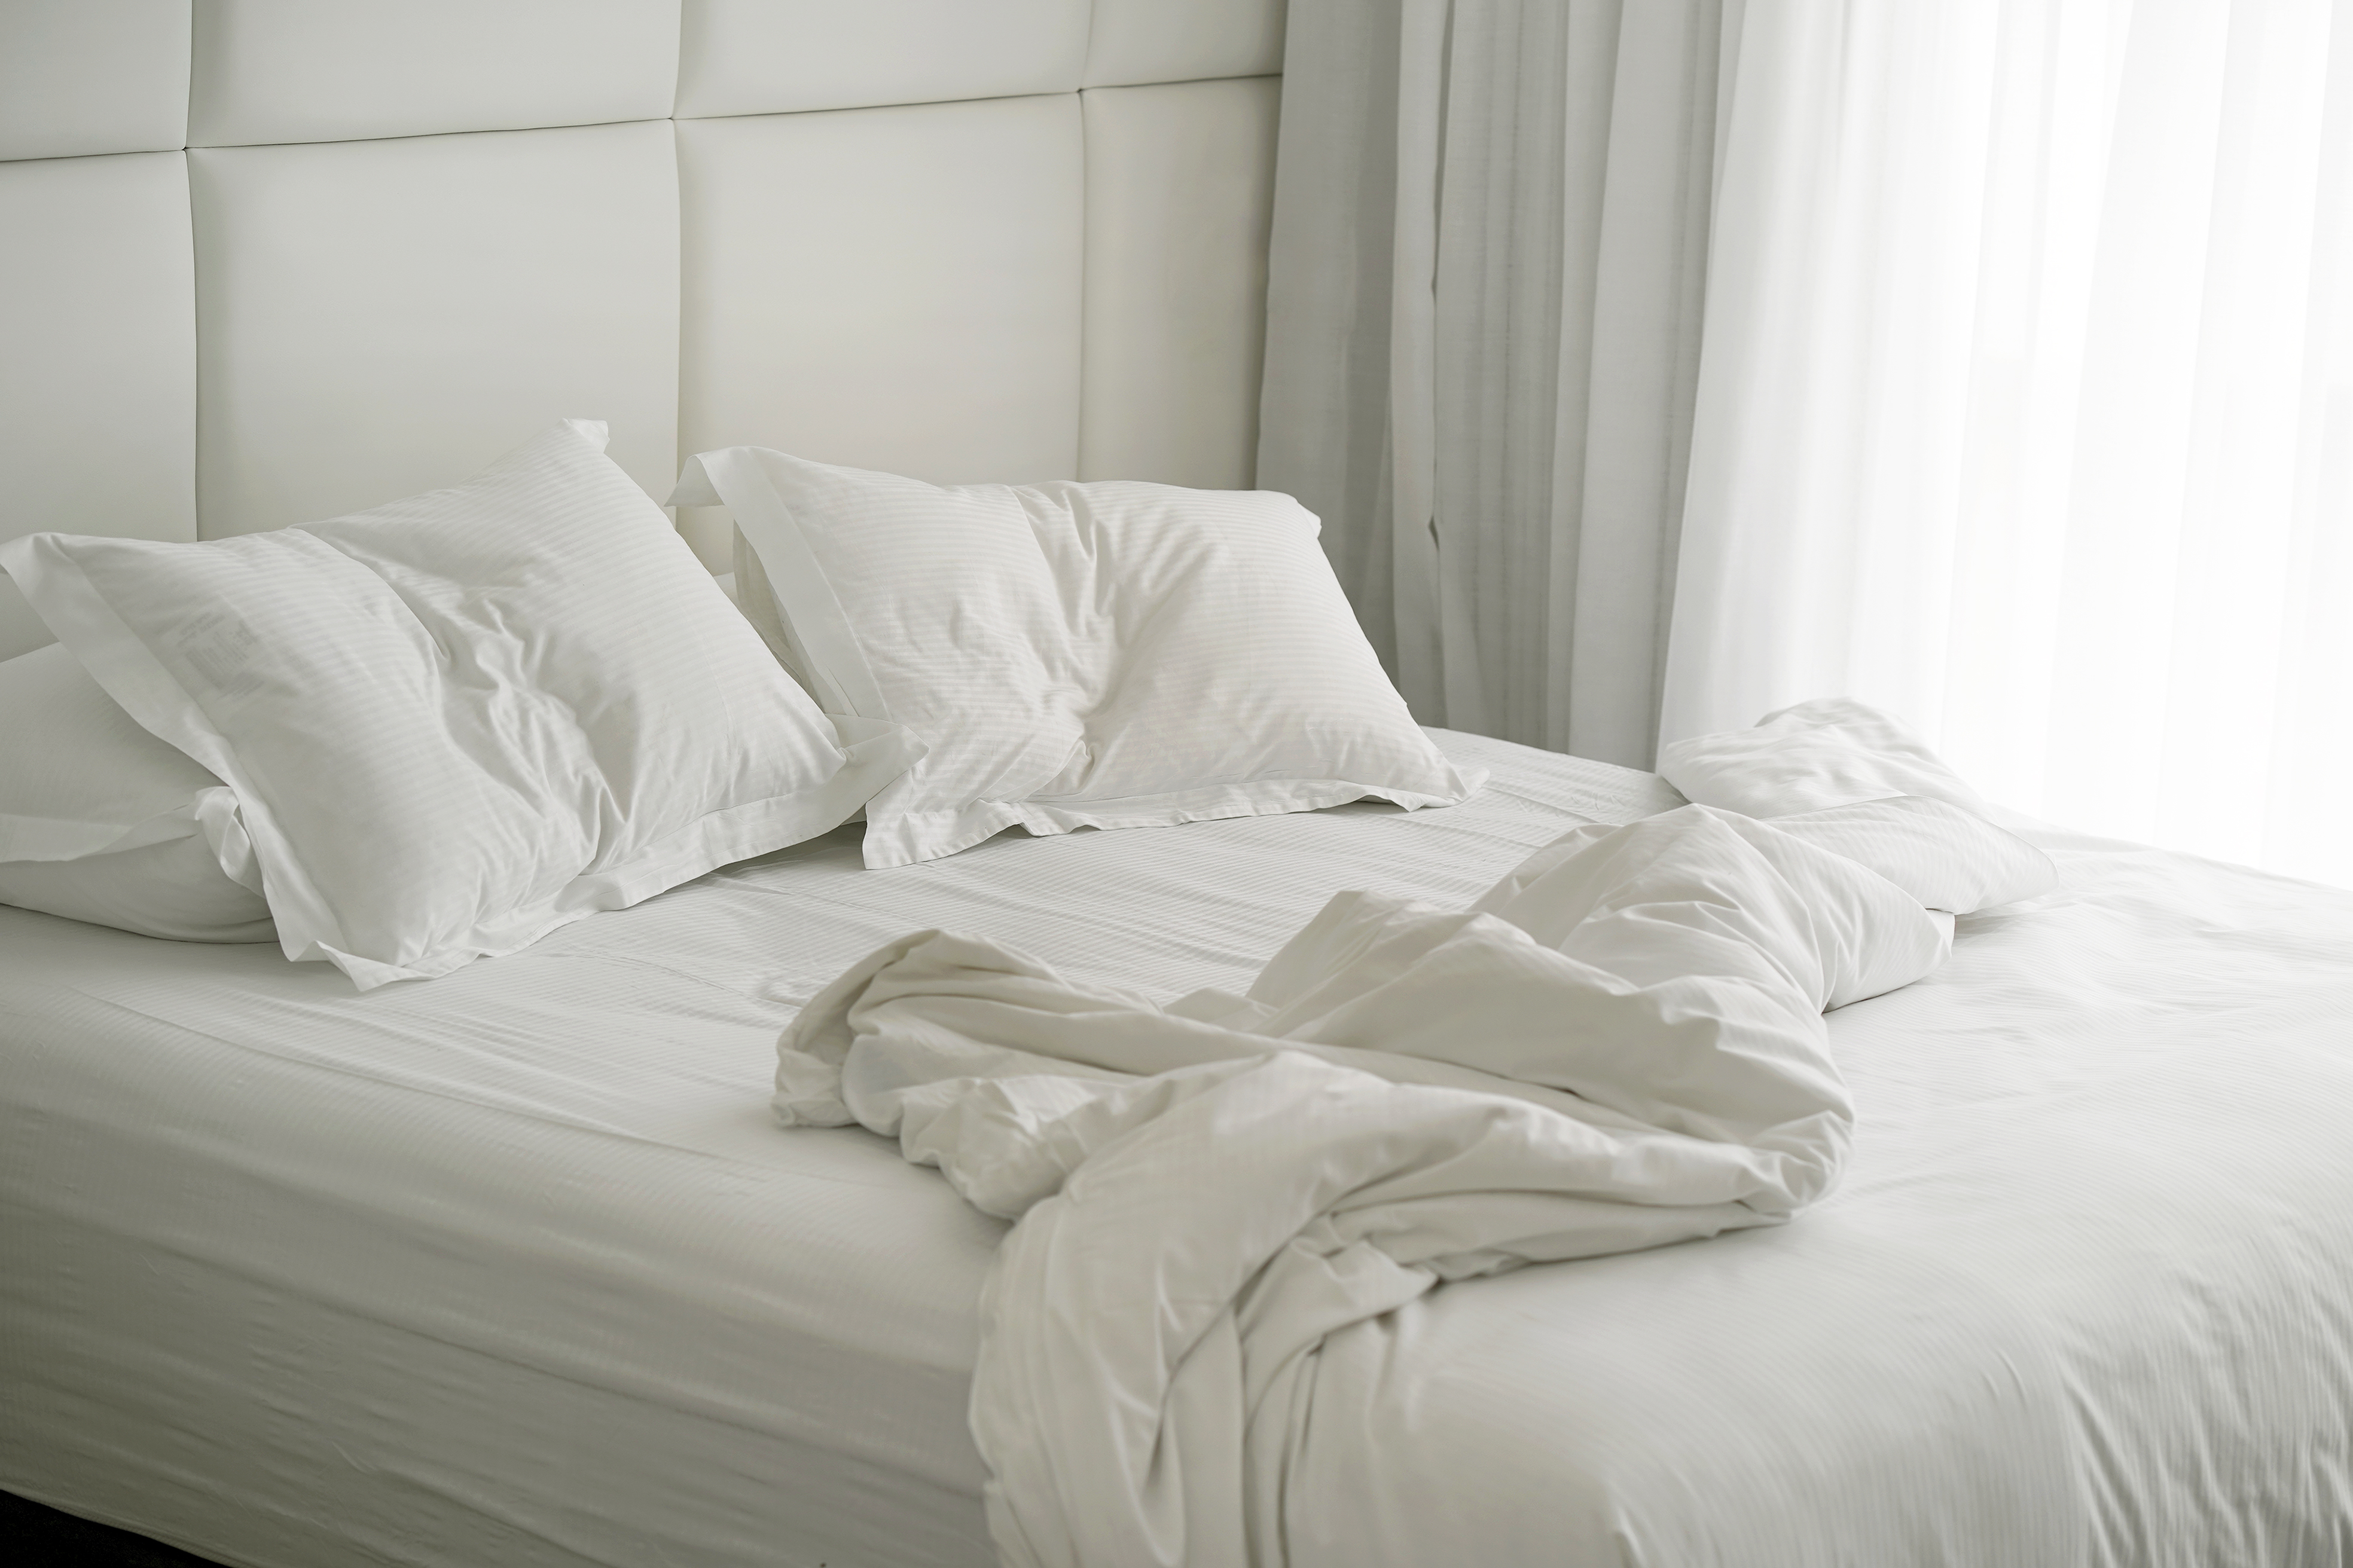 The rumpled bed | Source: Shutterstock